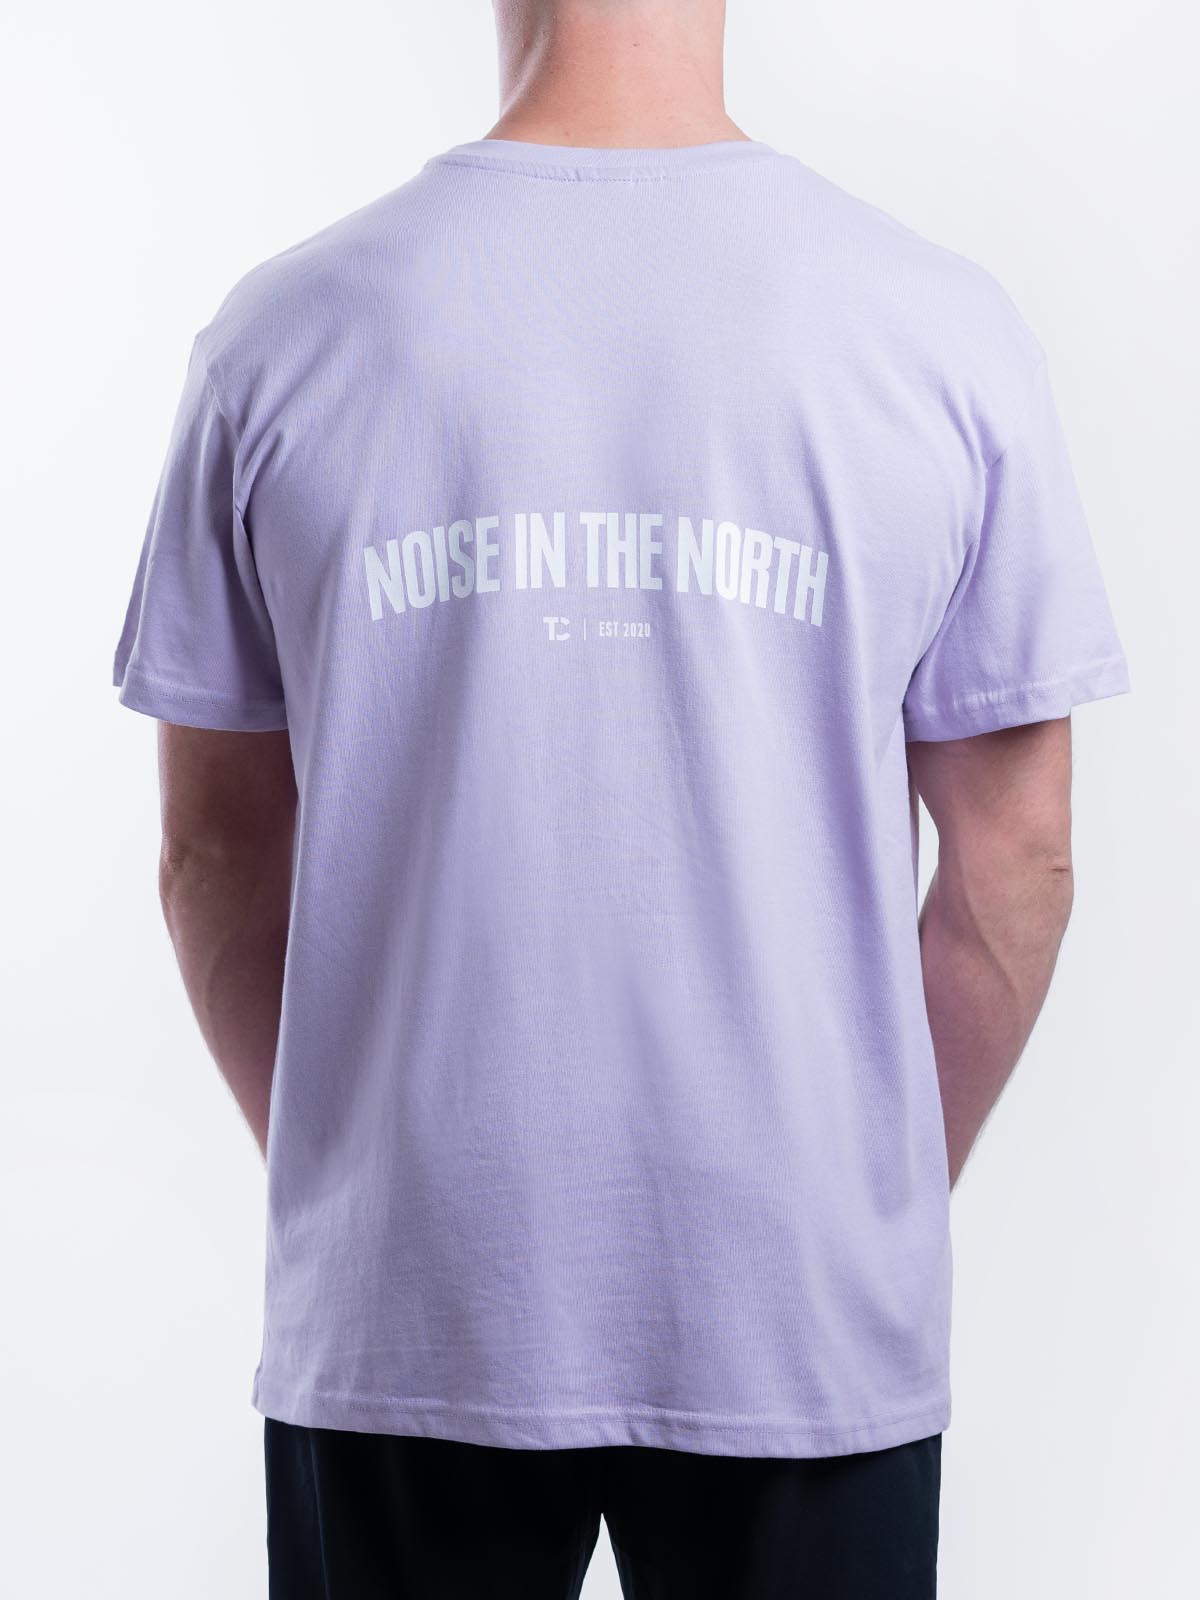 Noise in the North T-Shirt - Liliac